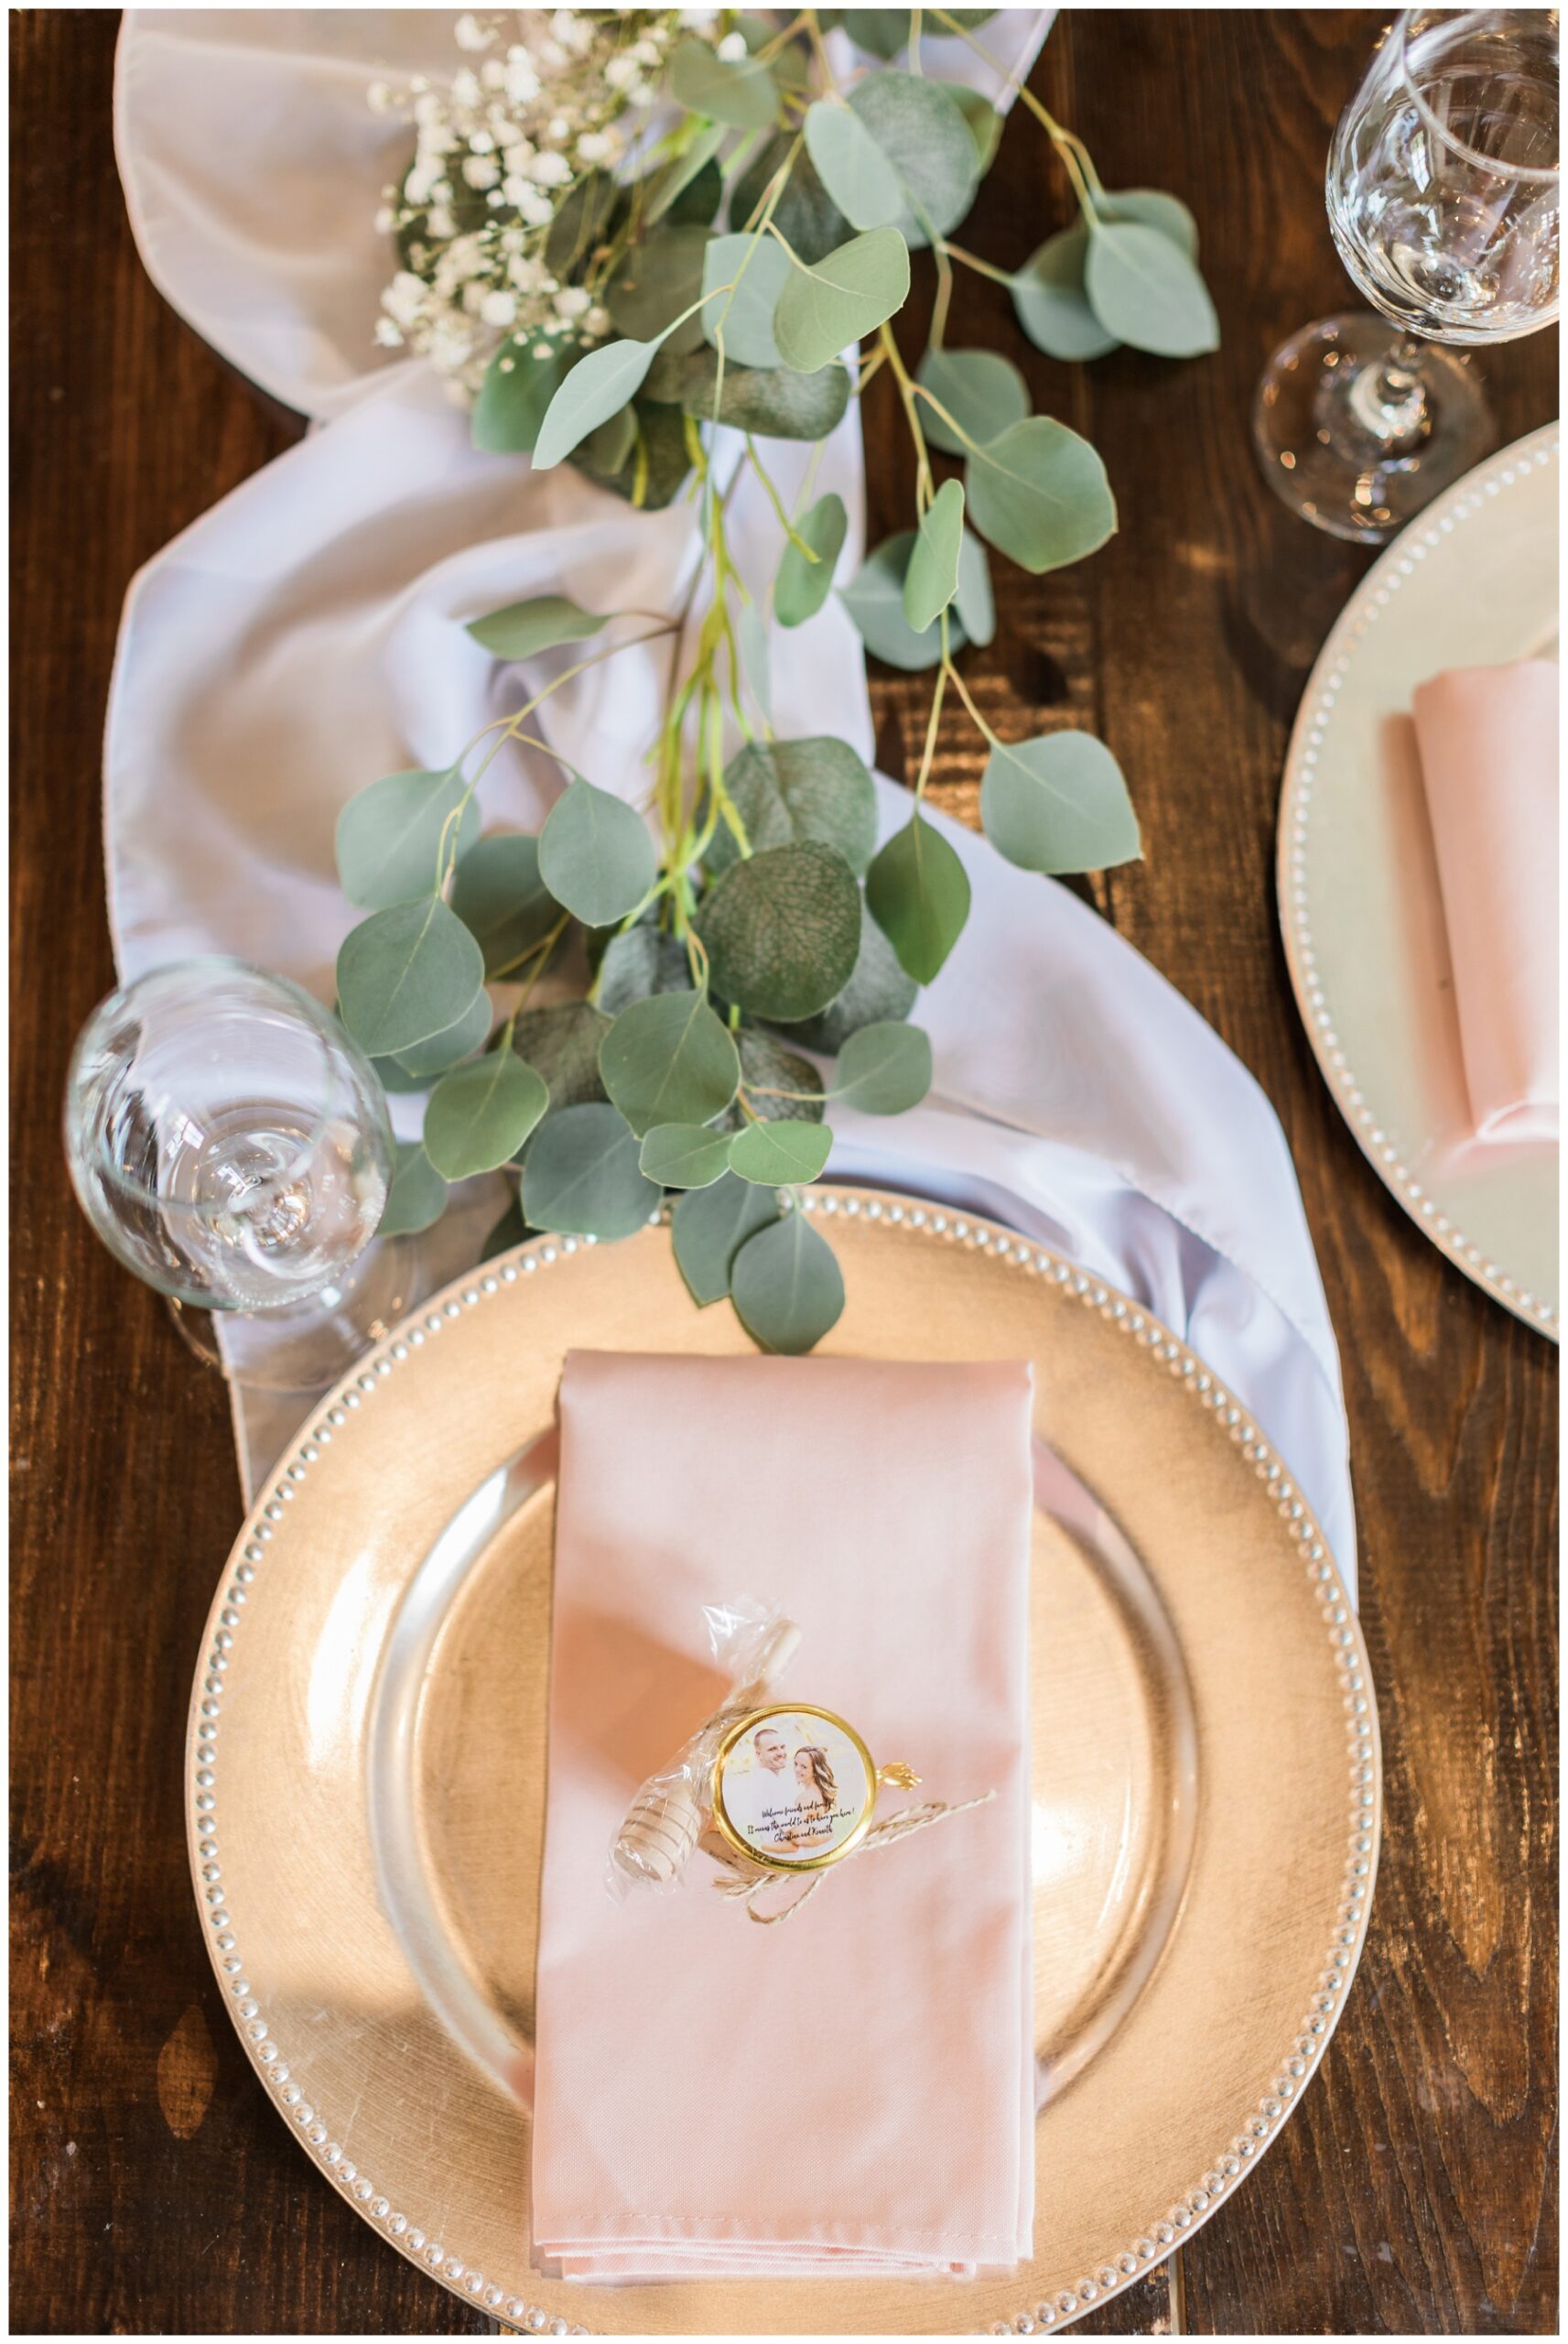 Classic wedding table setting with a copper plate and blush linen napkin